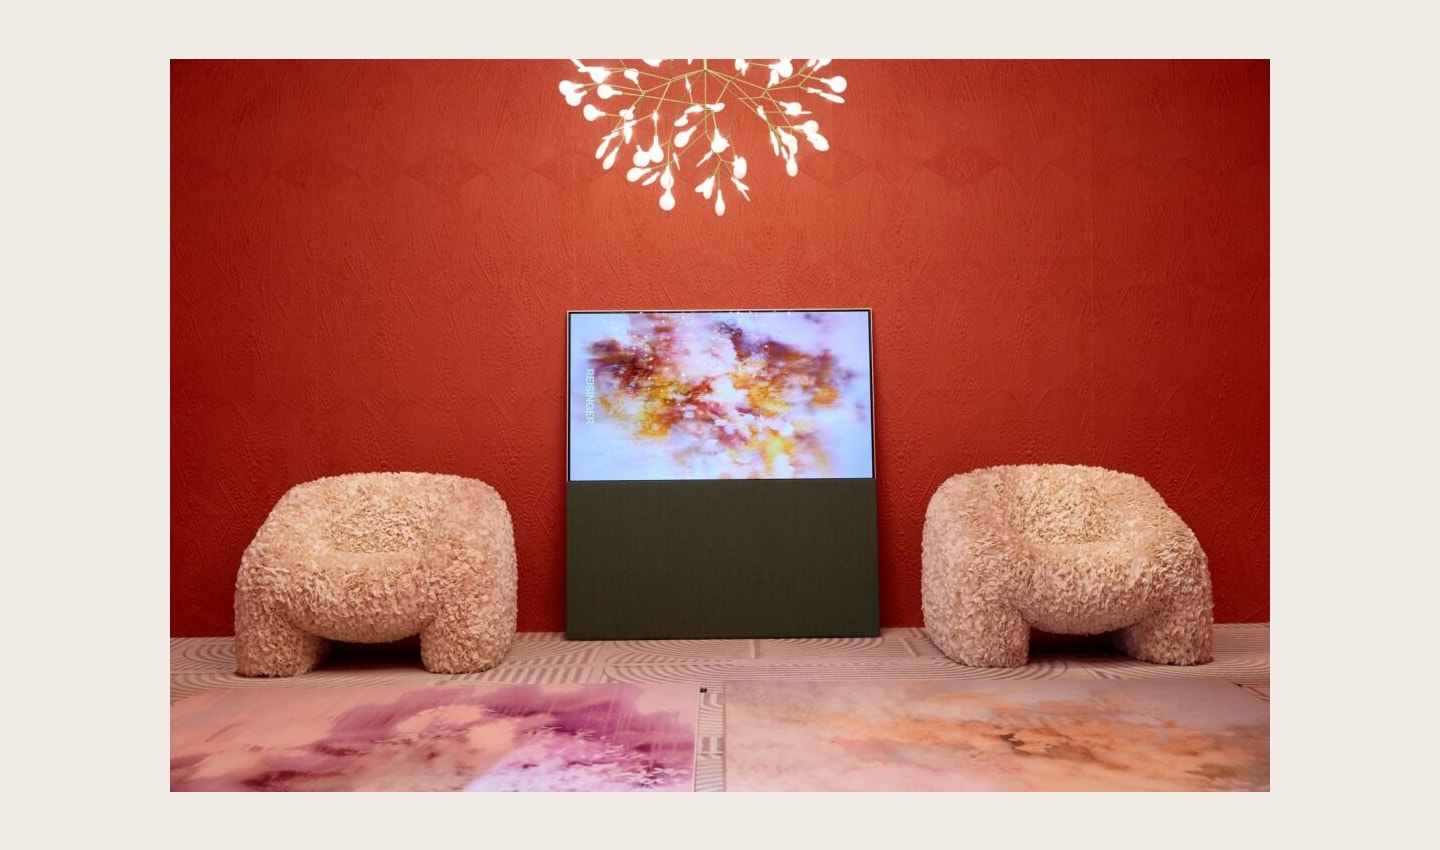 LG OLED Objet Collection Posé positioned between two sofas as it displays artwork in a red-themed showroom